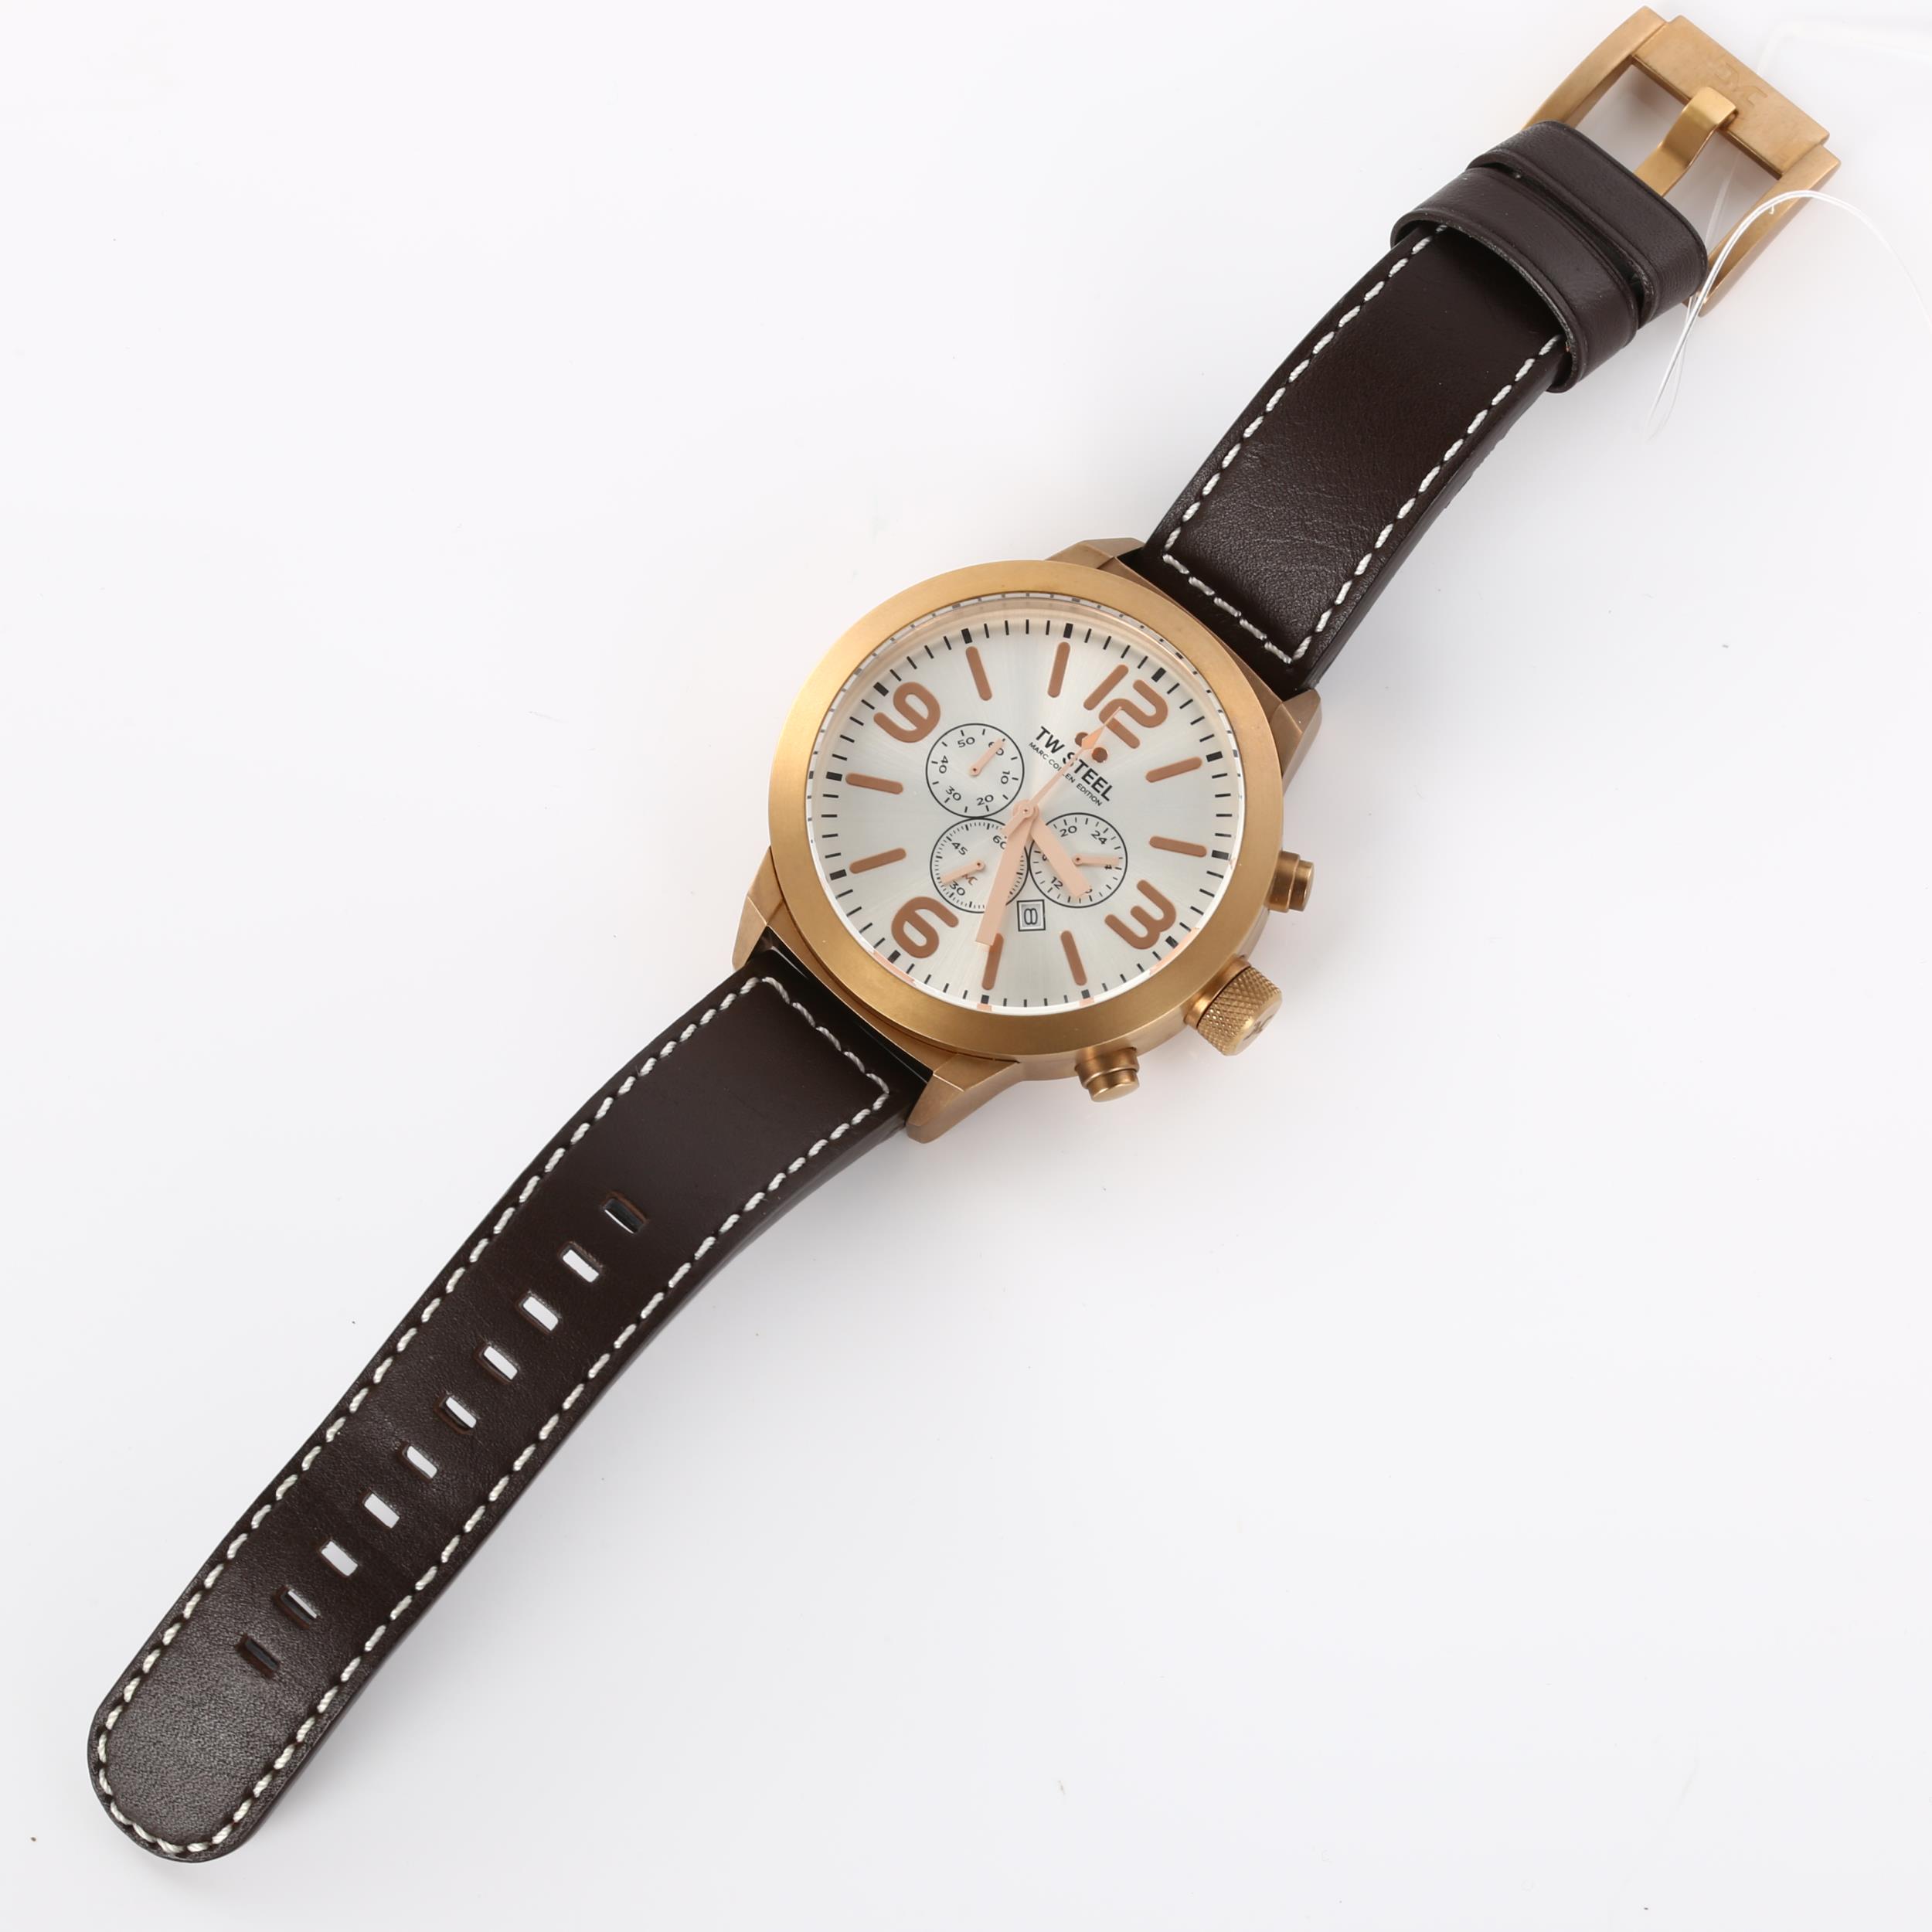 TW STEEL - a rose gold plated stainless steel Marc Coblen Edition quartz chronograph wristwatch, - Image 3 of 5